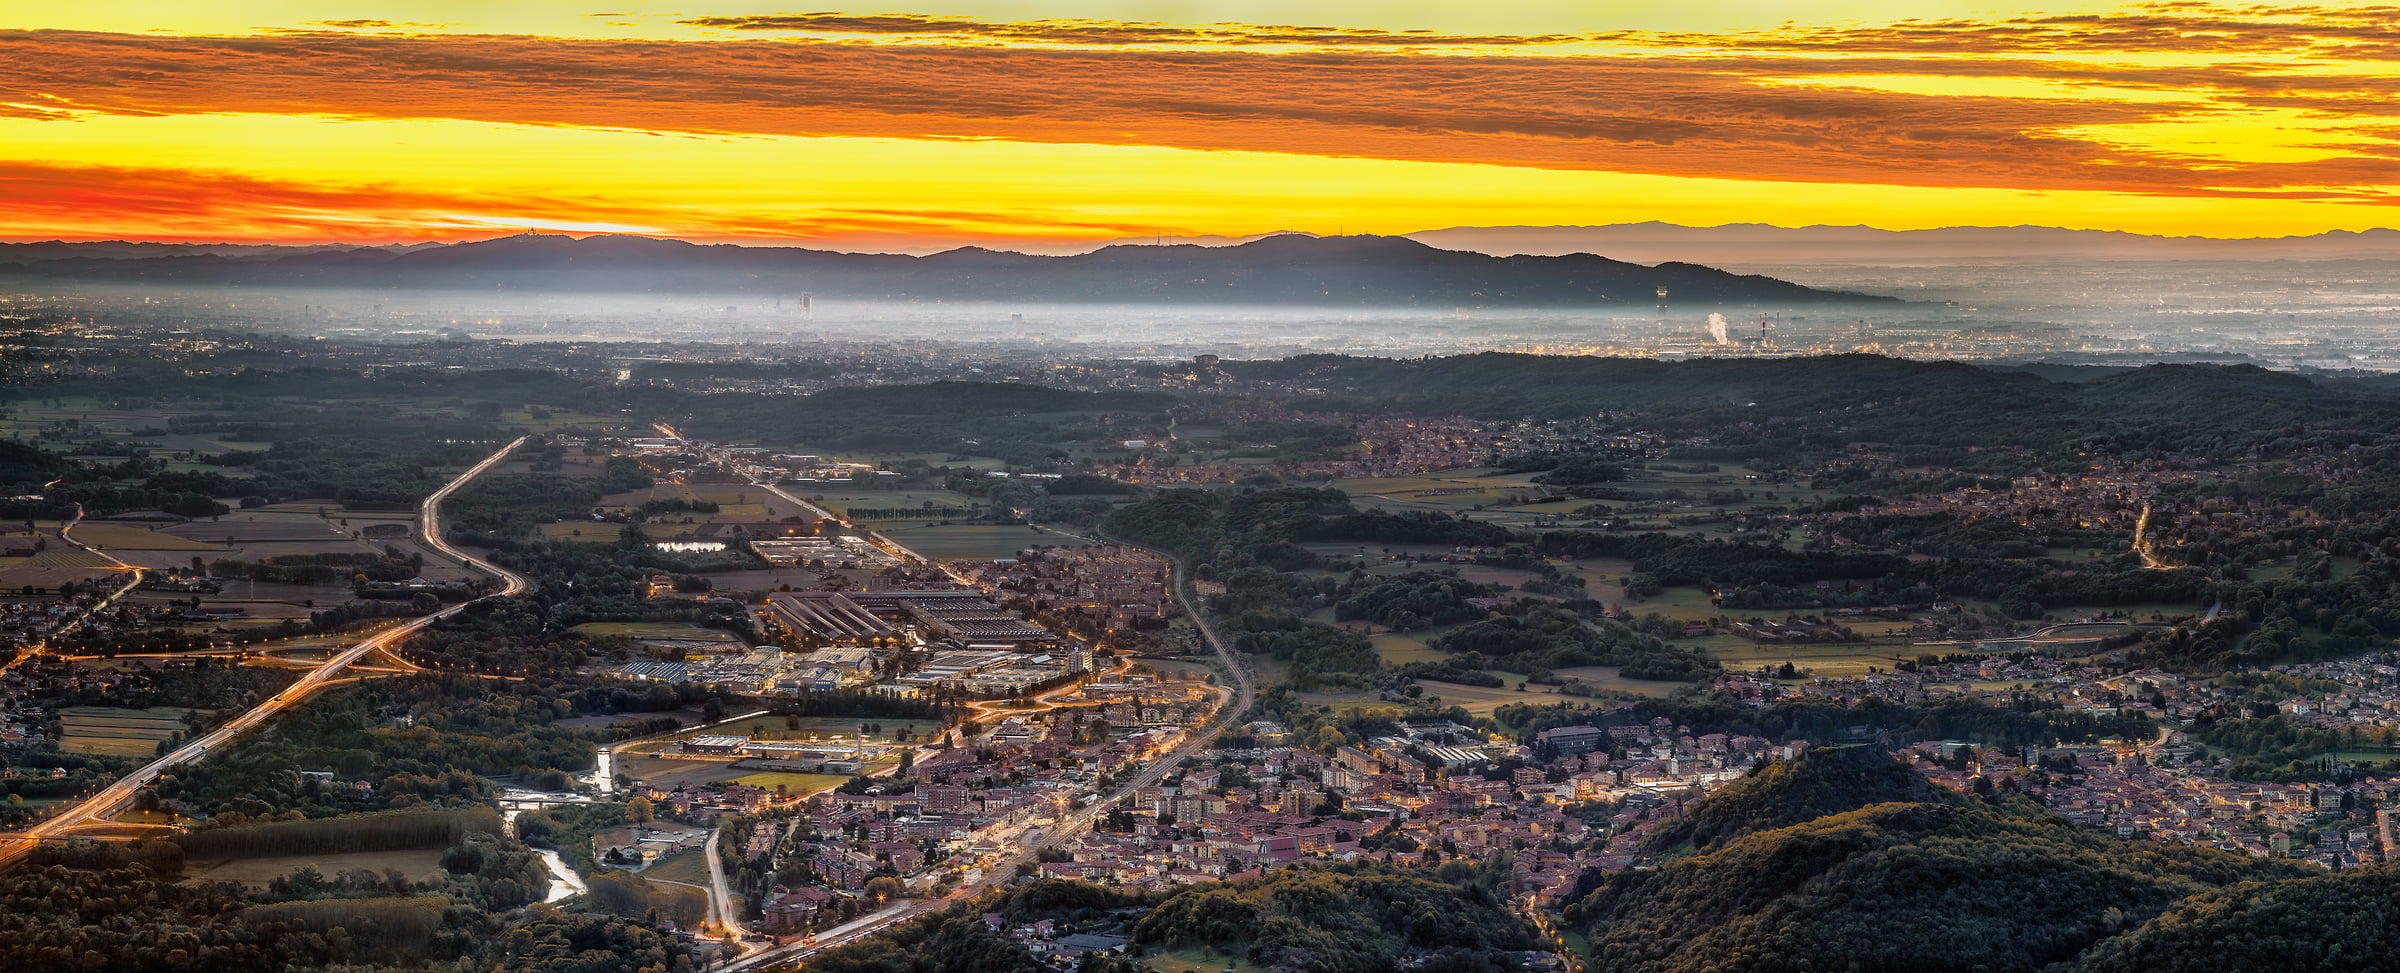 480 megapixels! A very high resolution, large-format VAST photo print of Turin, Italy at sunset; photograph created by Duilio Fiorille in Punta Ancoccia, Sant'Ambrogio, Piedmont, Italy